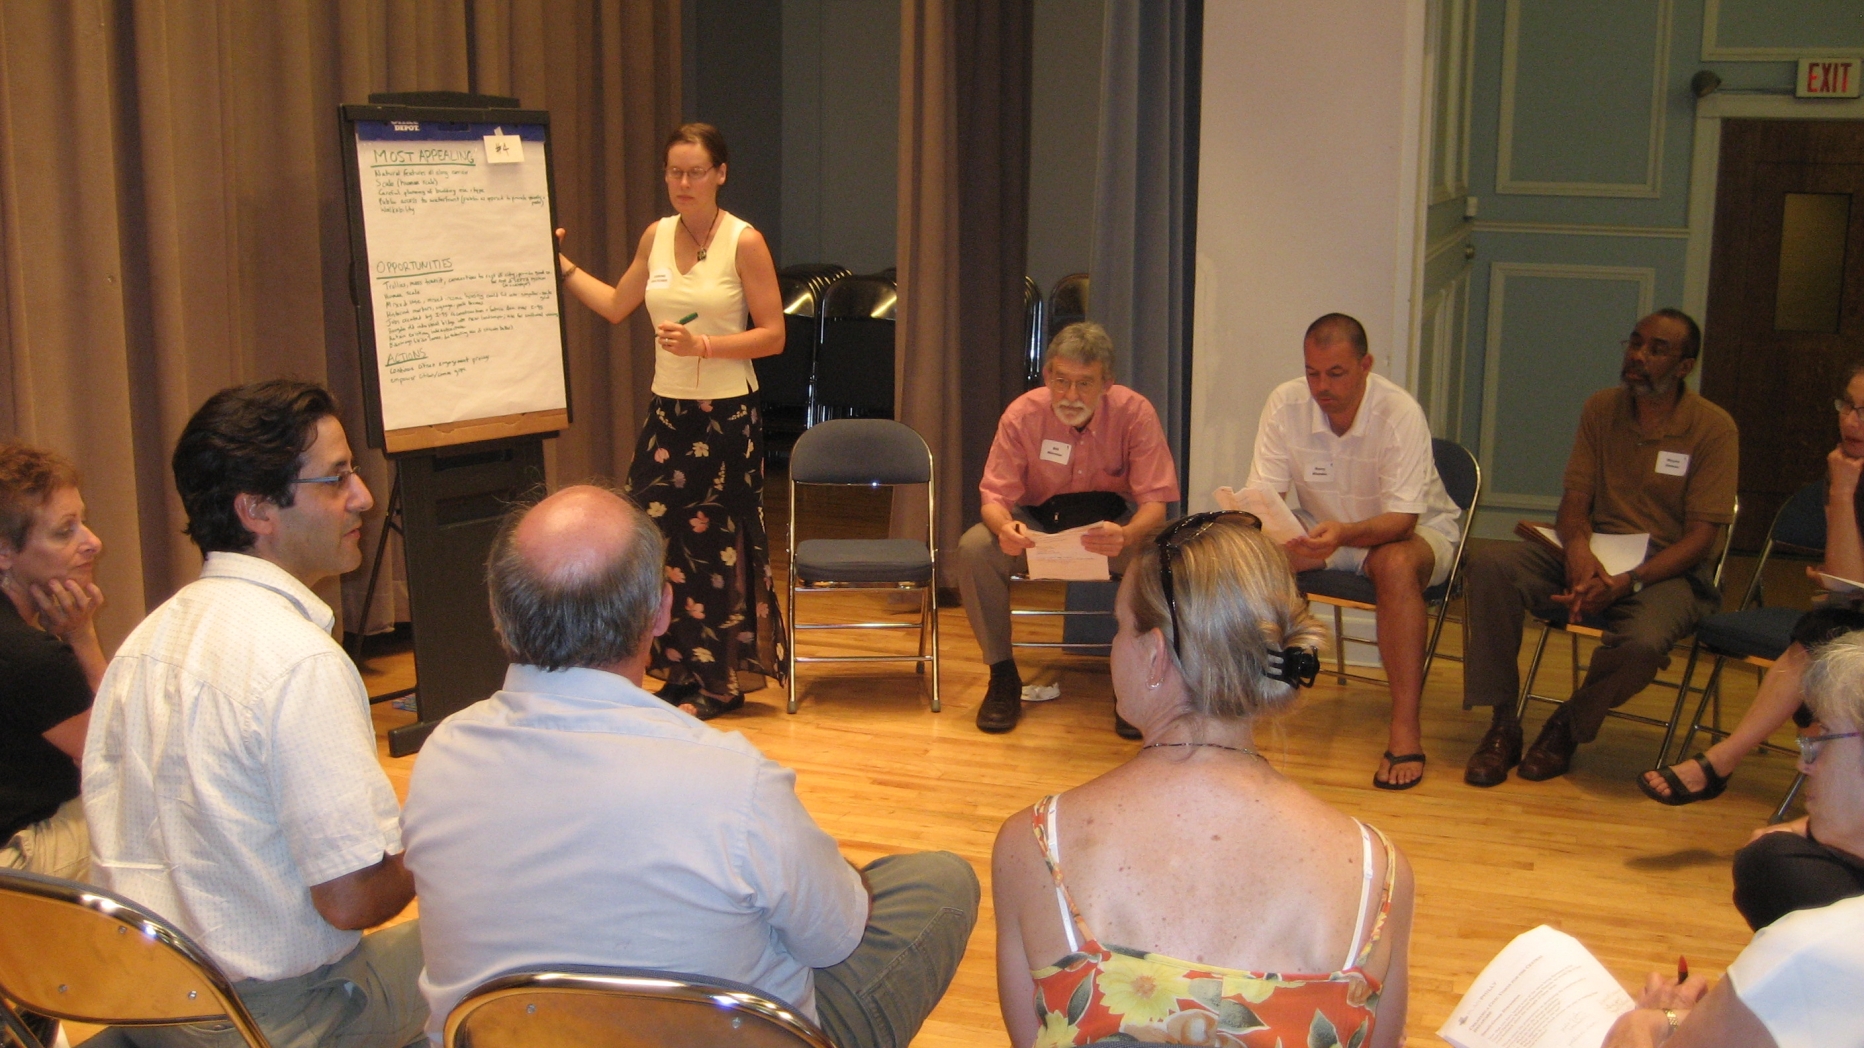 Project participants sit in a circle of chairs and discuss issues written on a large pad of paper at the front of the room.